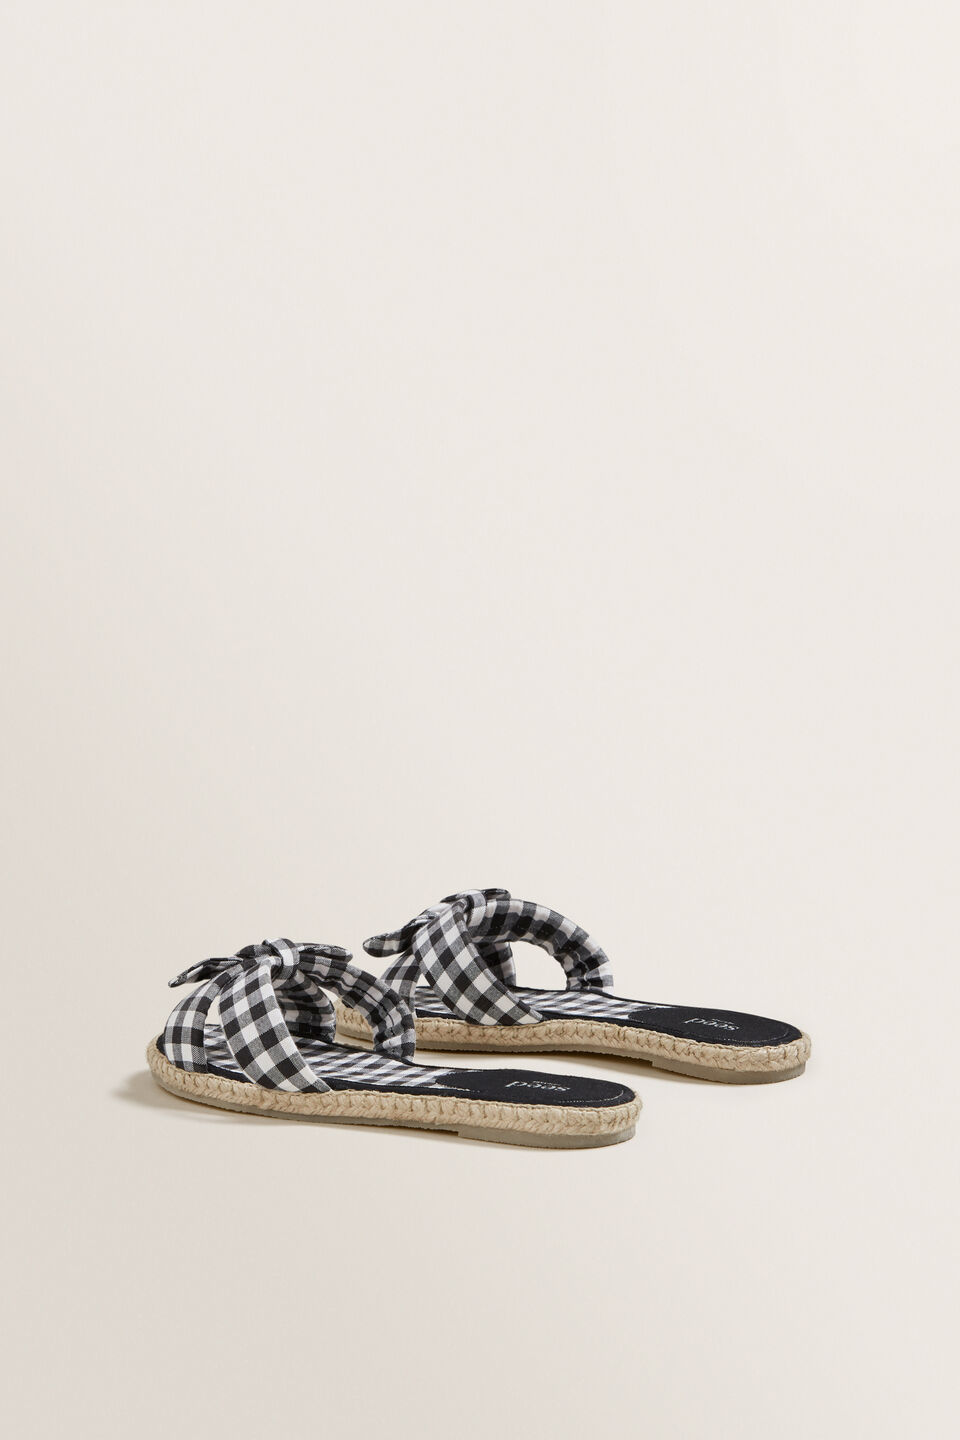 Milly Bow Espadrille  